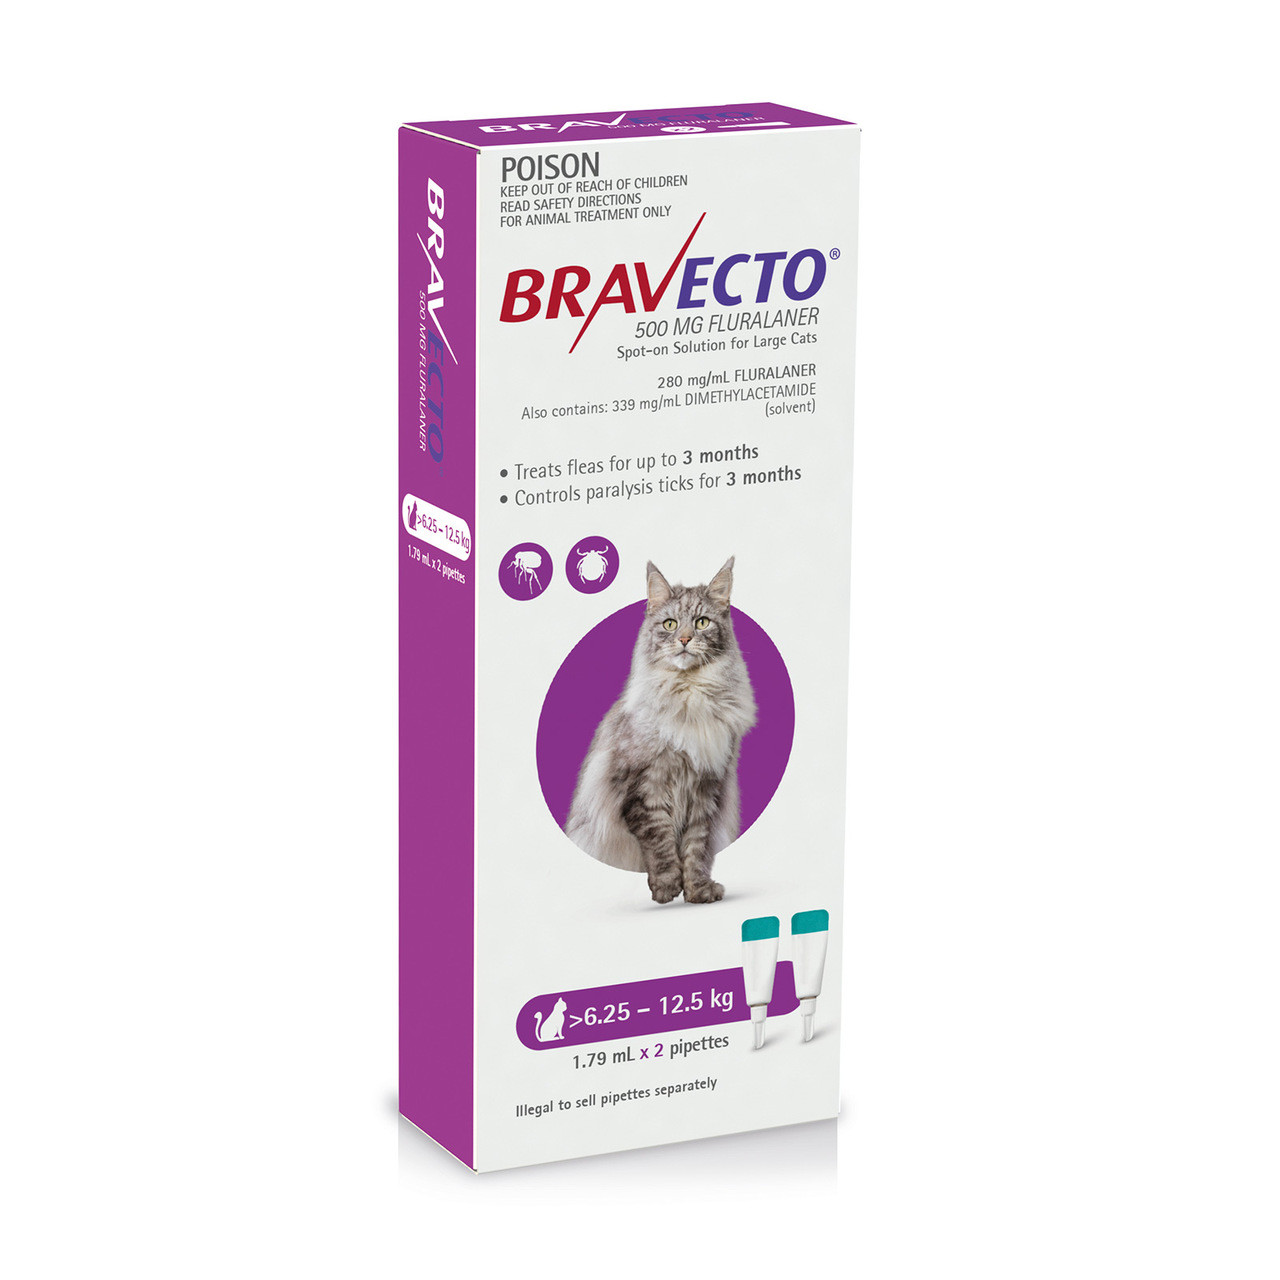 Bravecto Topical Solution for Cats 13.8-27.5 lbs (6.25-12.5 kg